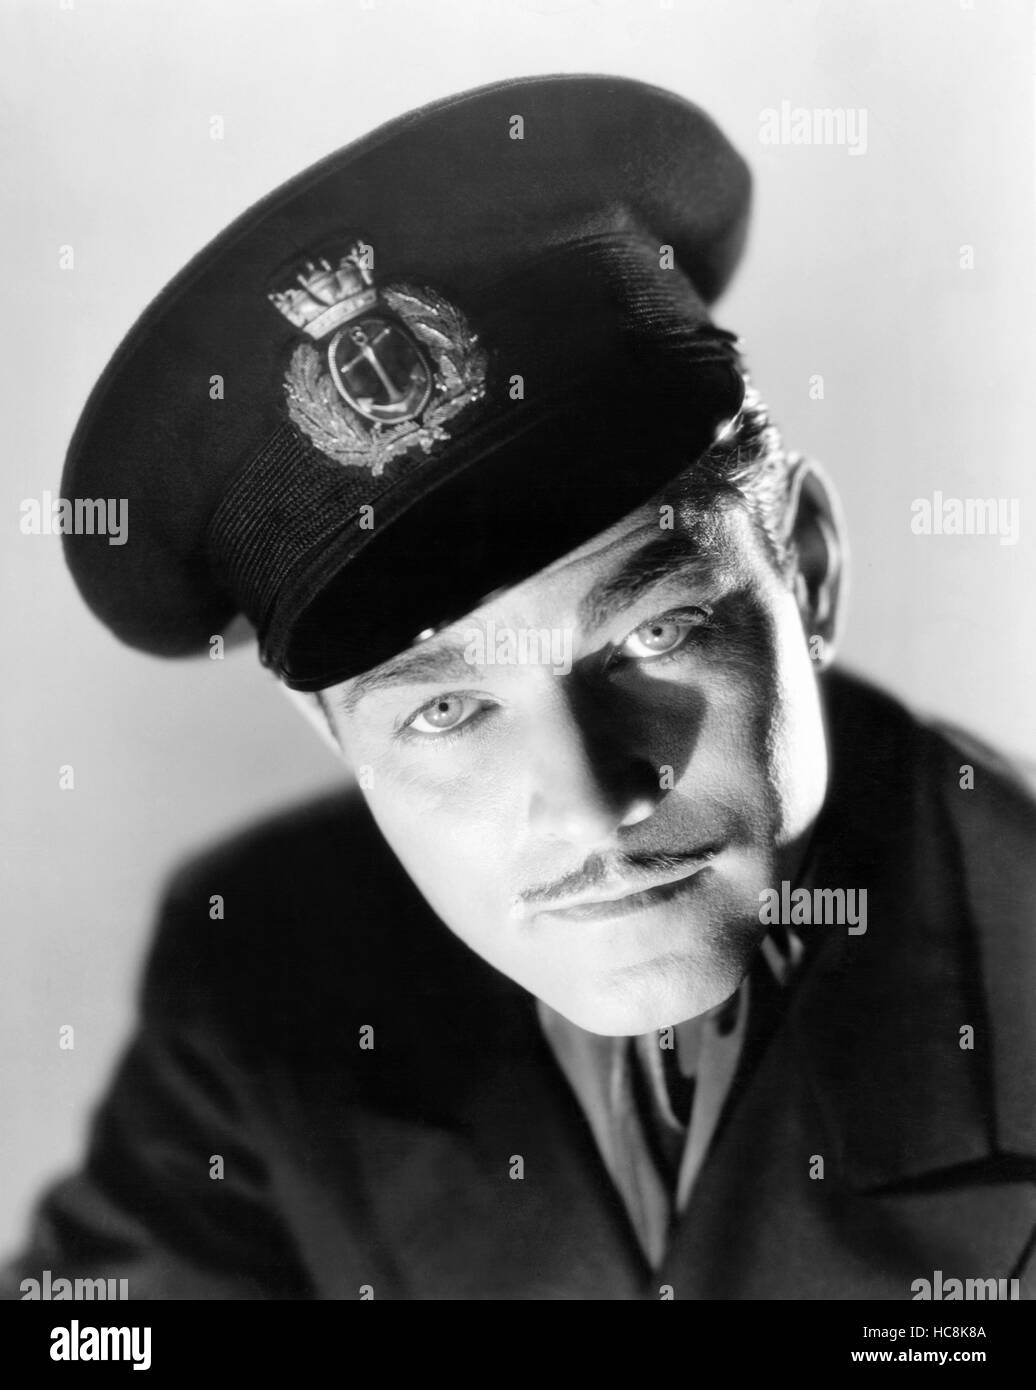 TWO TICKETS TO LONDON, Alan Curtis, 1943 Stock Photo - Alamy